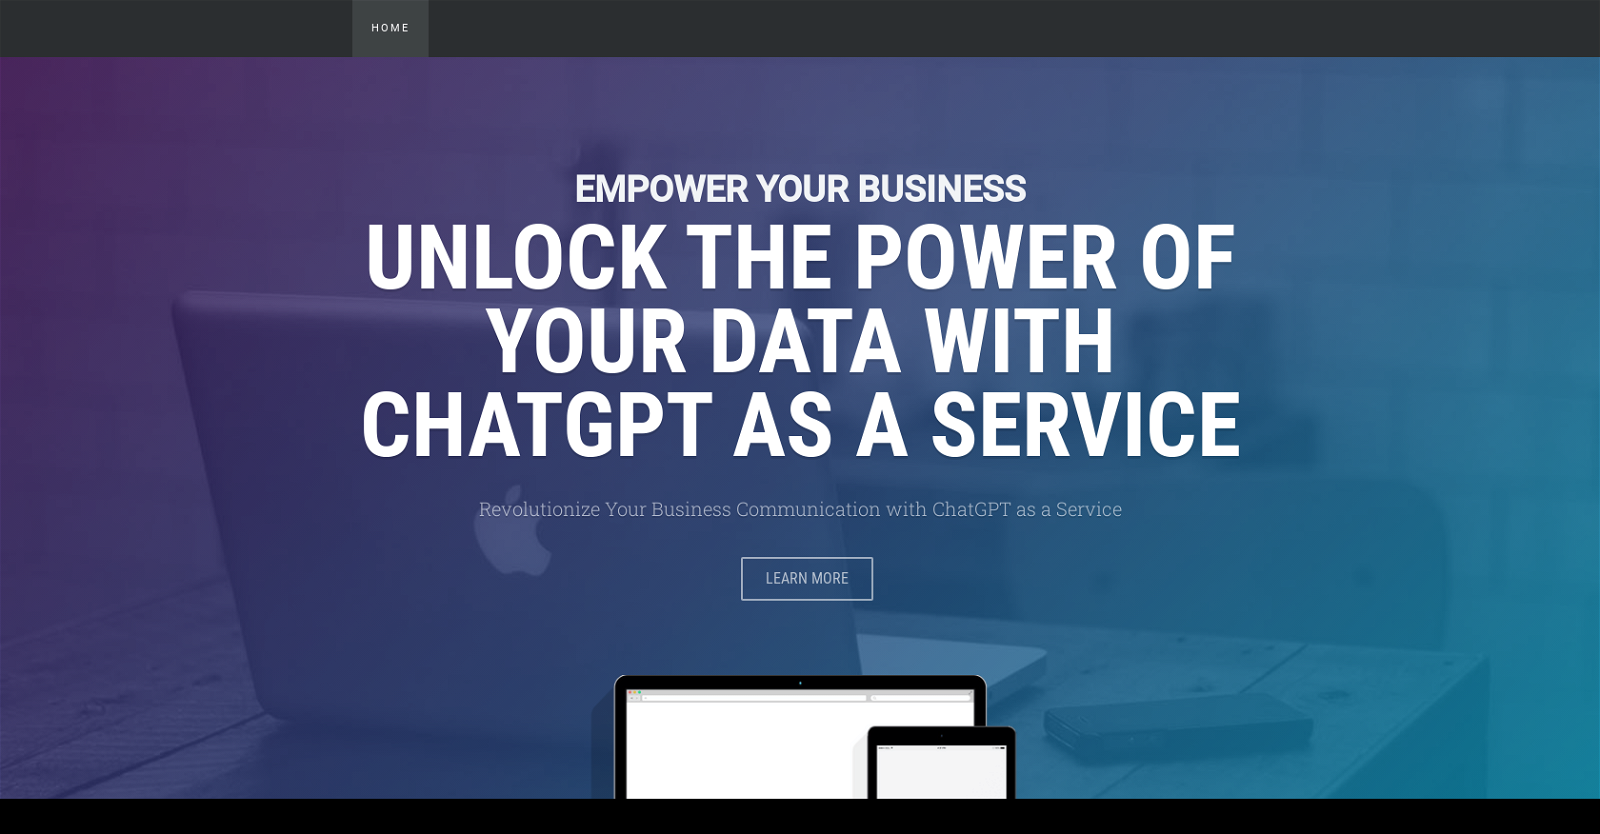 ChatGPT as a Service website